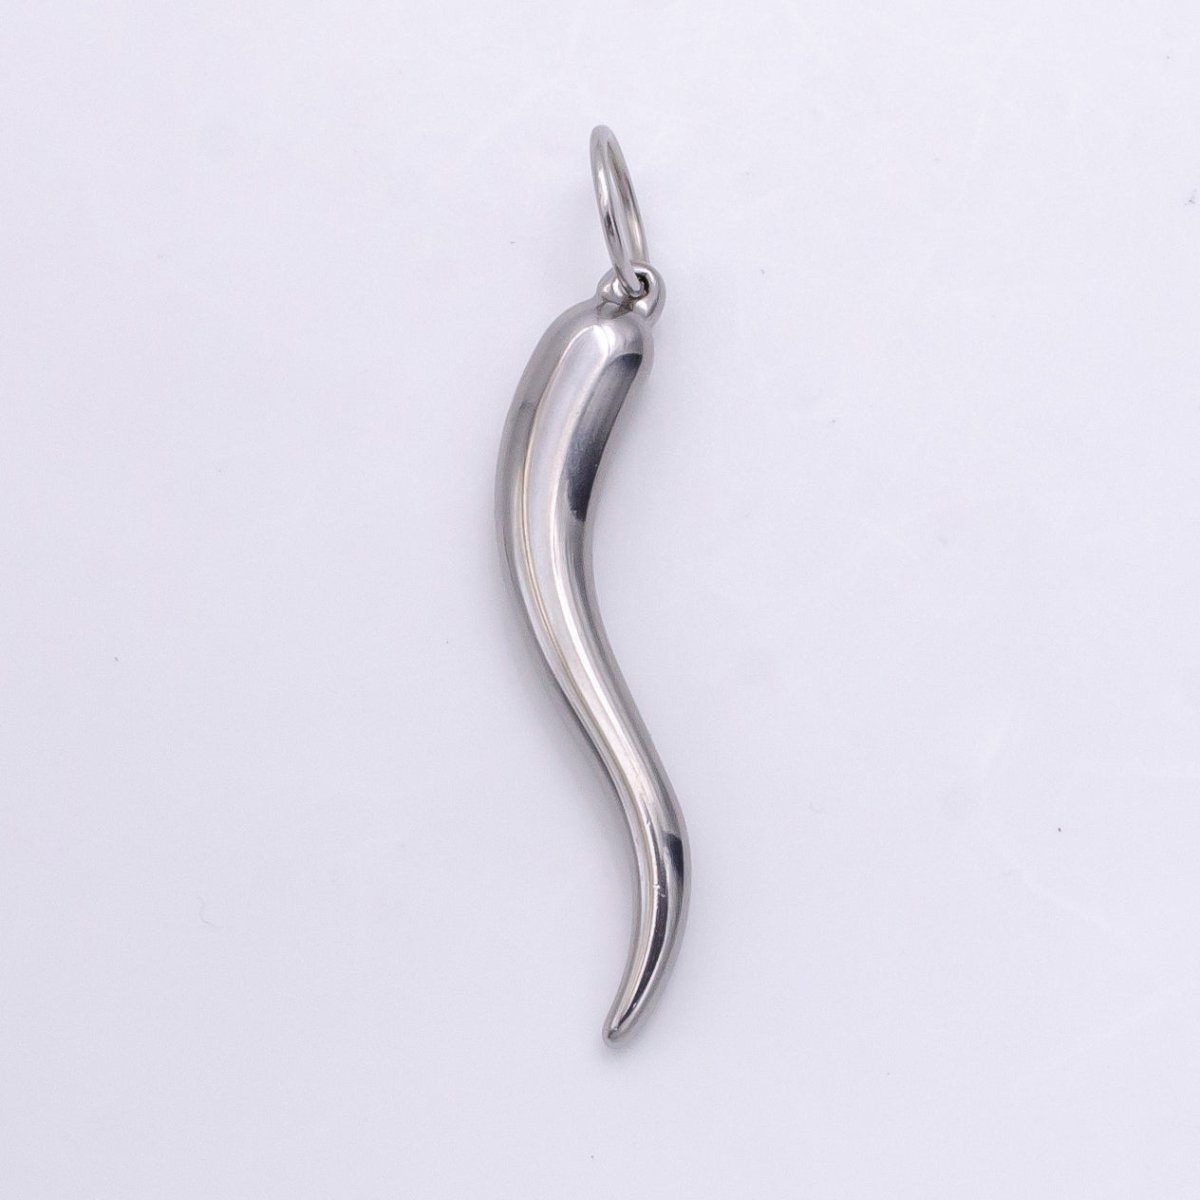 Silver Stainless Steel Italian Horn Charm Cornicello cornetto Good Luck Protection Amulet Pendant for Necklace Jewelry Making Supplies E-659 E-660 J-661 - DLUXCA